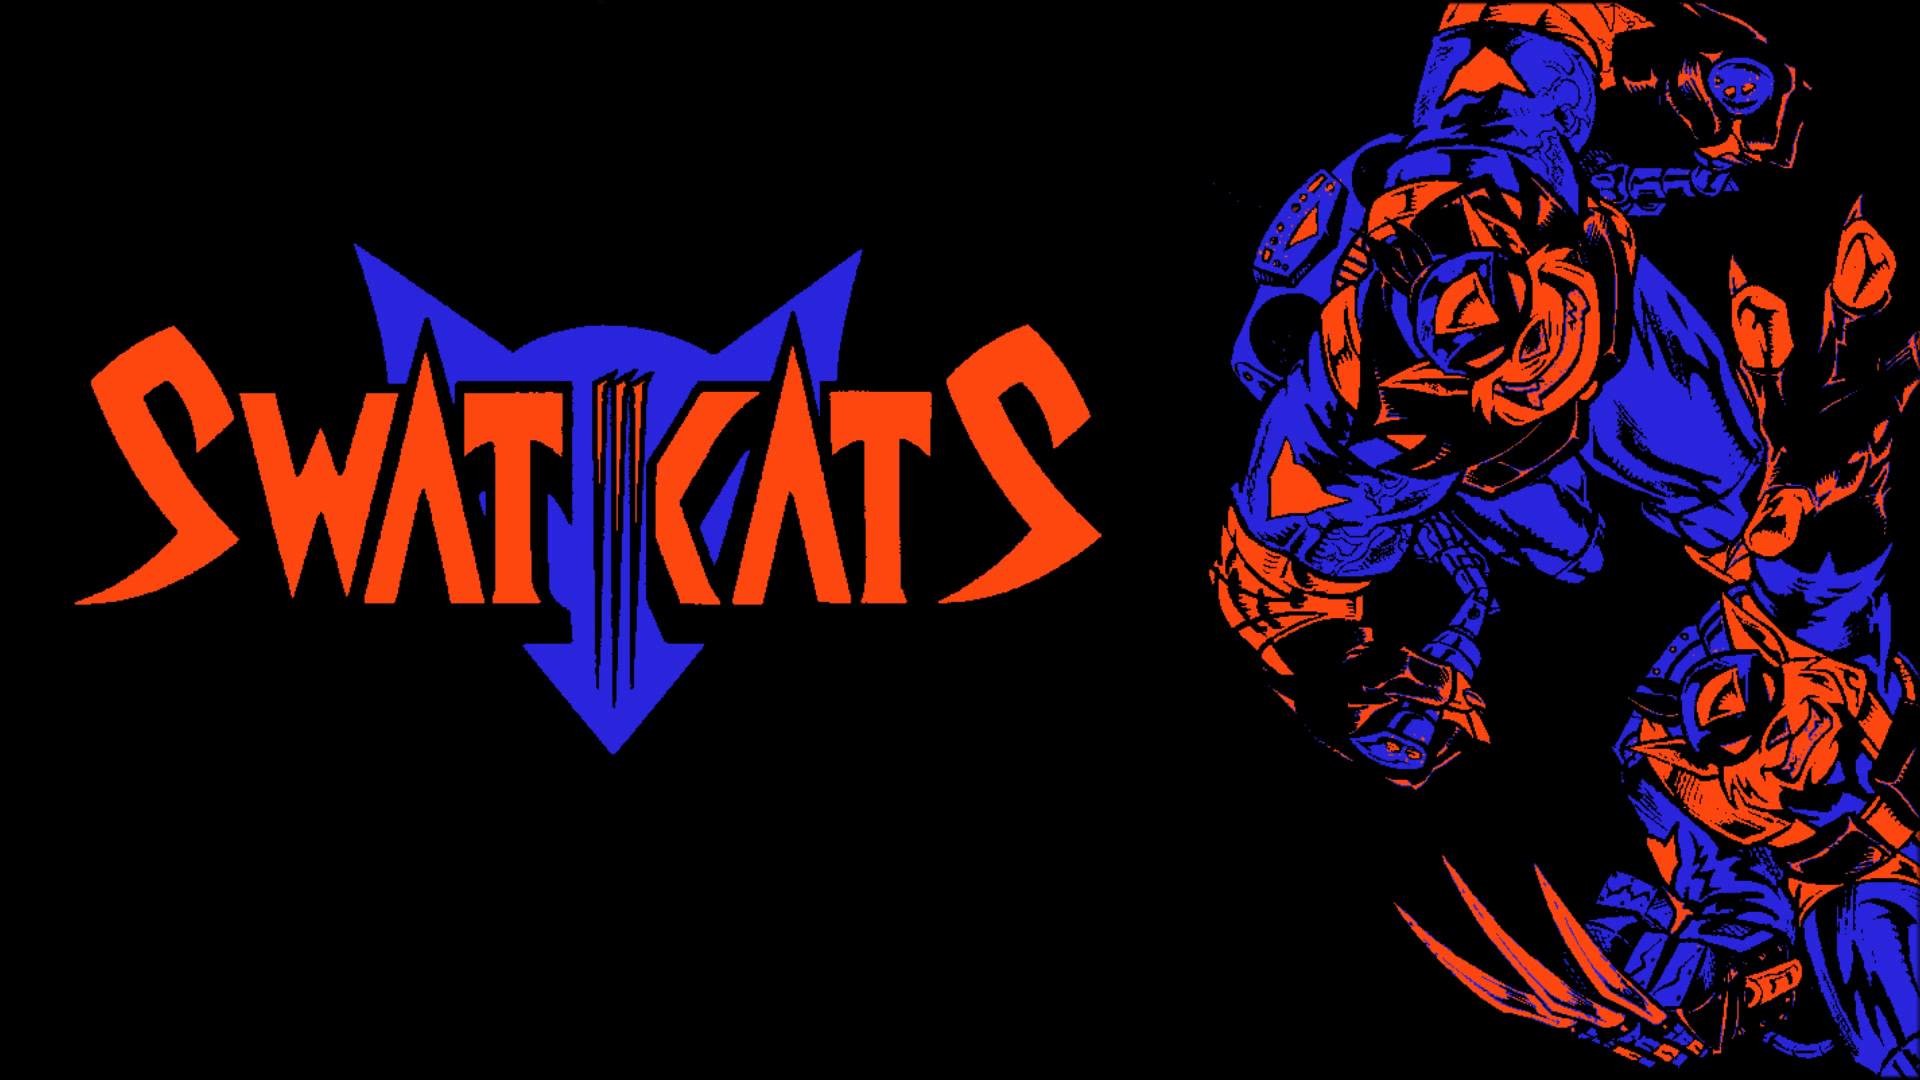 1920x1080 Swat Cats Wallpapers | Free | Download